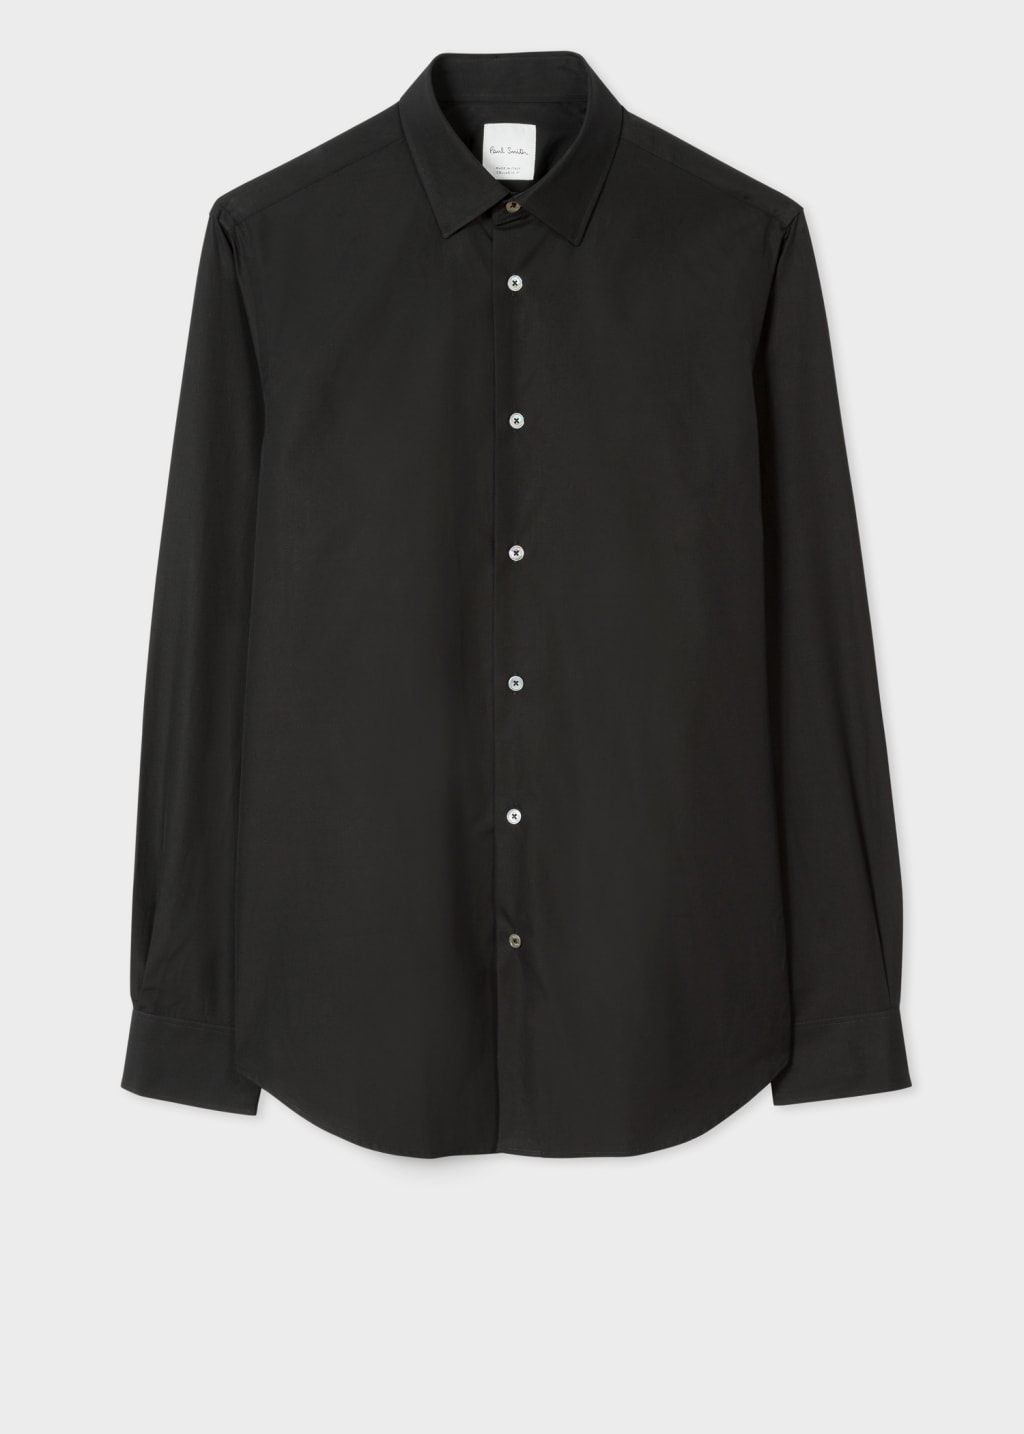 Front View - Tailored-Fit Black Cotton 'Artist Stripe' Cuff Shirt Paul Smith